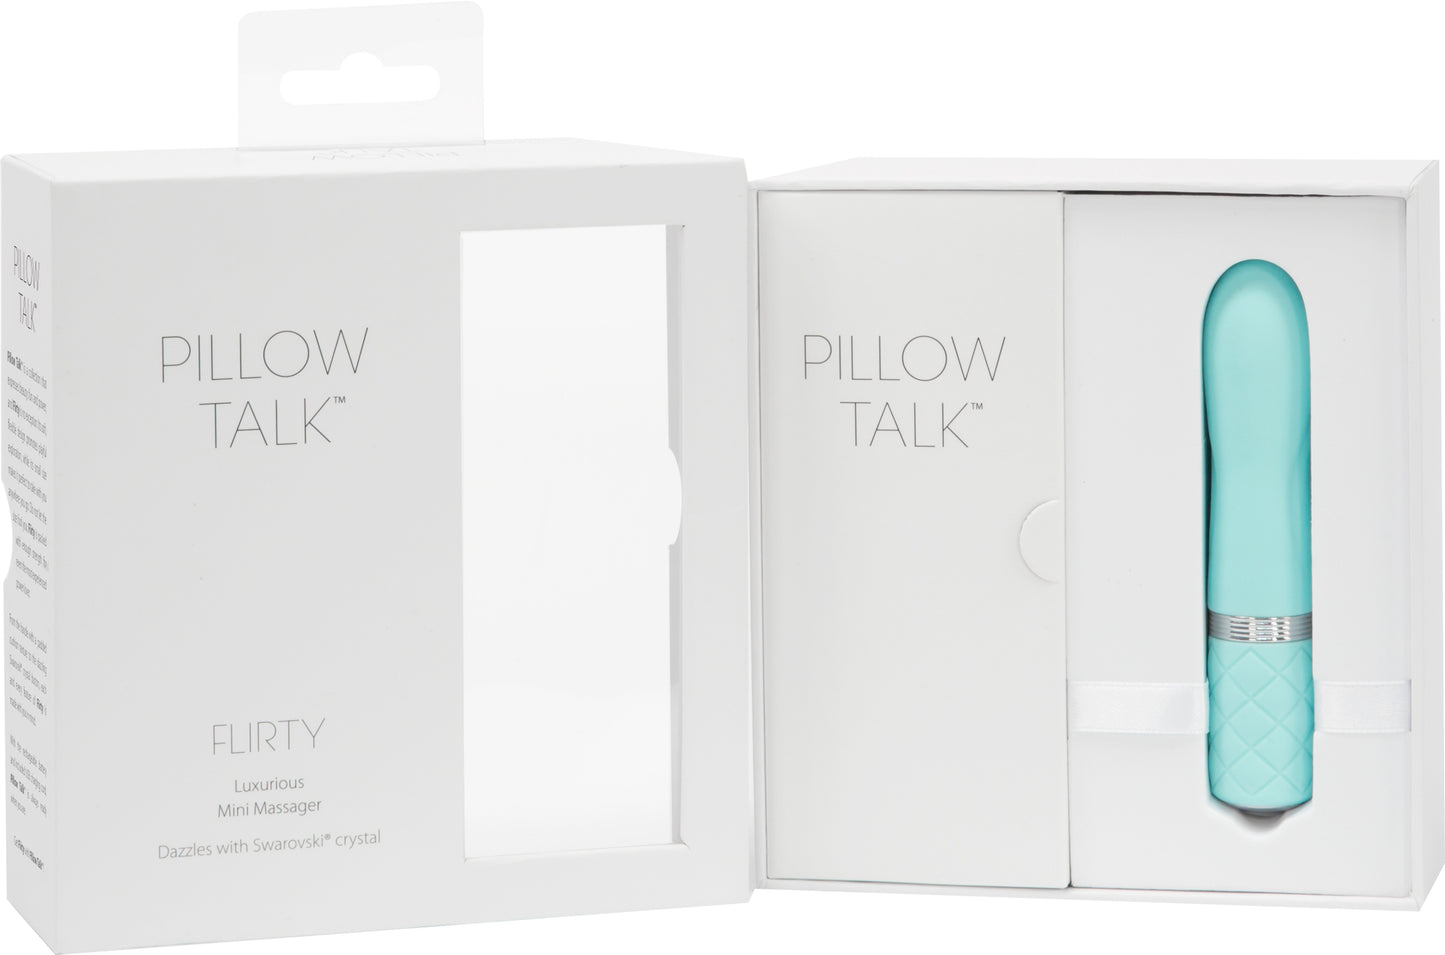 Pillow Talk Flirty in its box with the lid open showing the toy inside (teal).